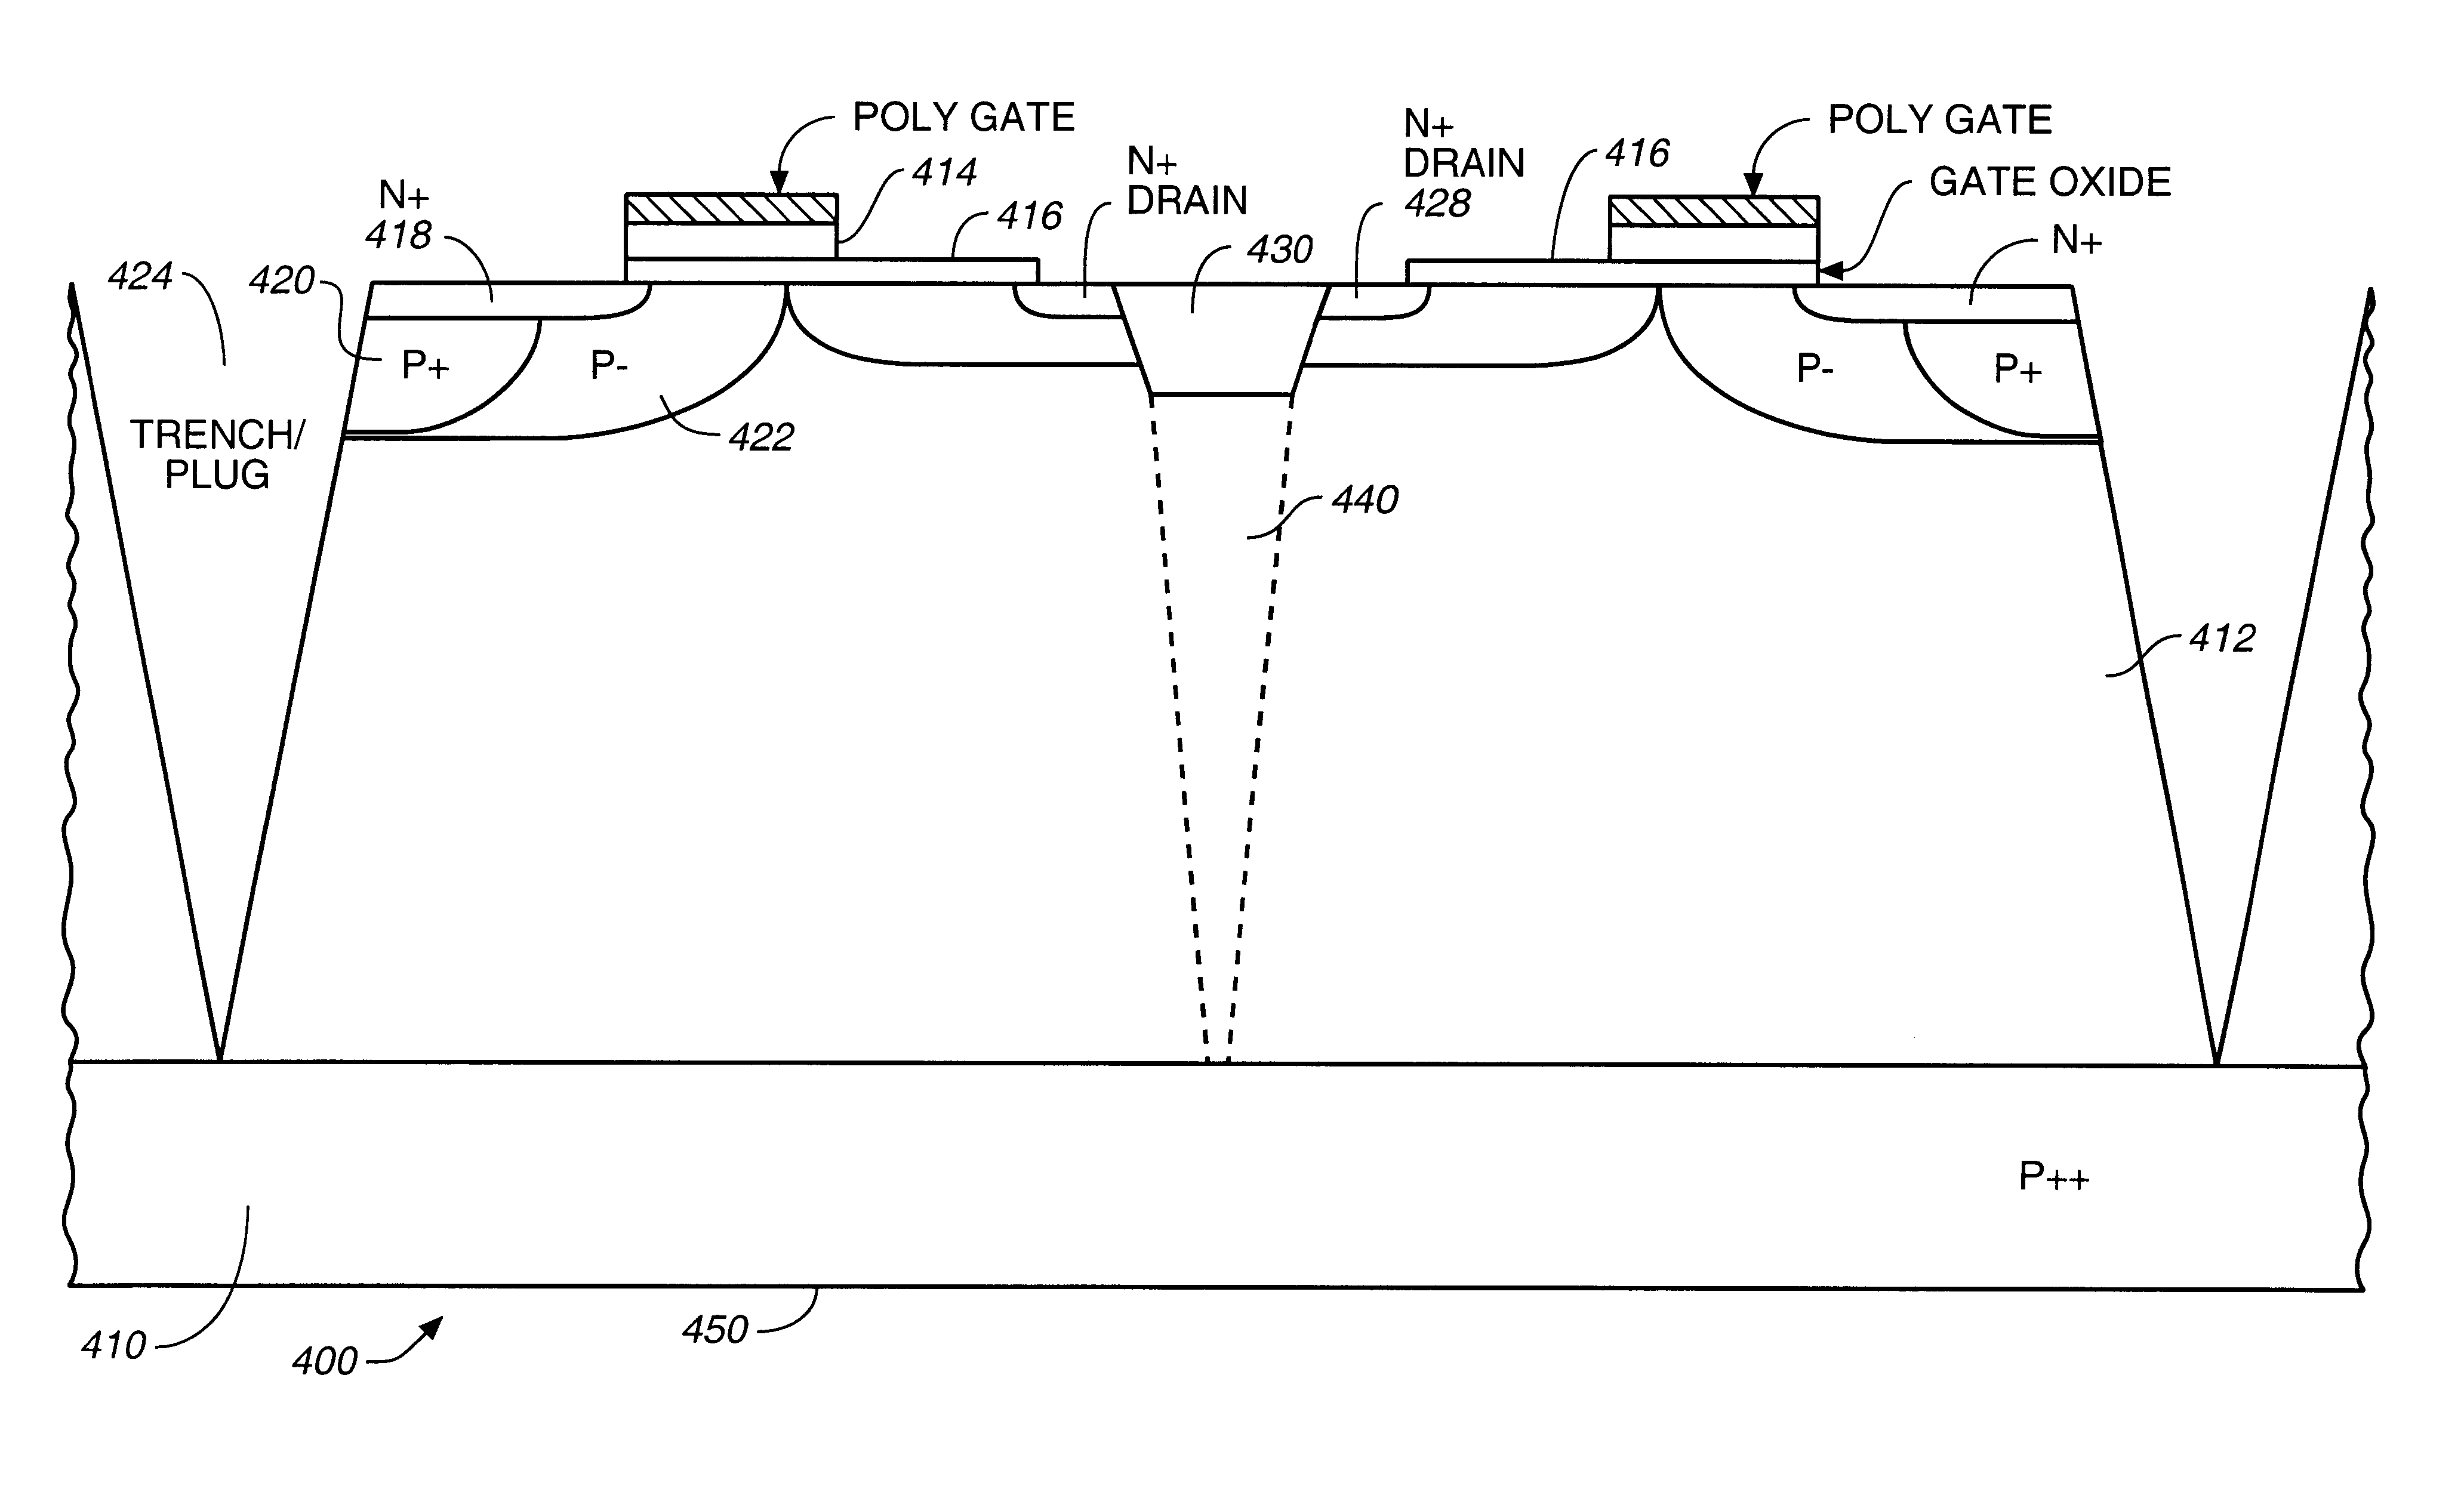 Lateral RF MOS device with improved drain structure